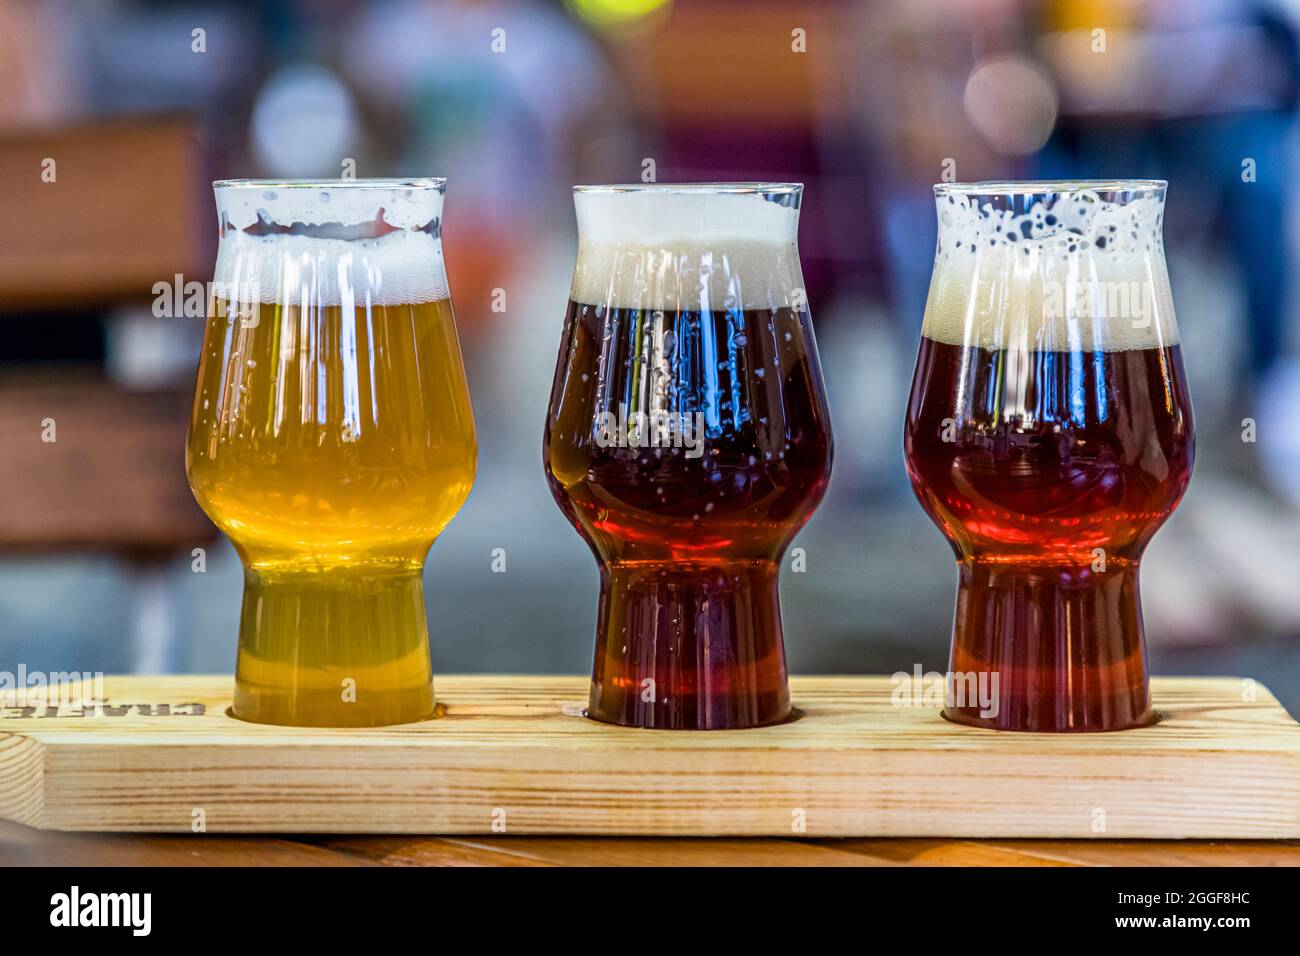 Tasting glasses with craft beer from the Pfefferlechner home brewery in Lana, South Tyrol, Italy Stock Photo